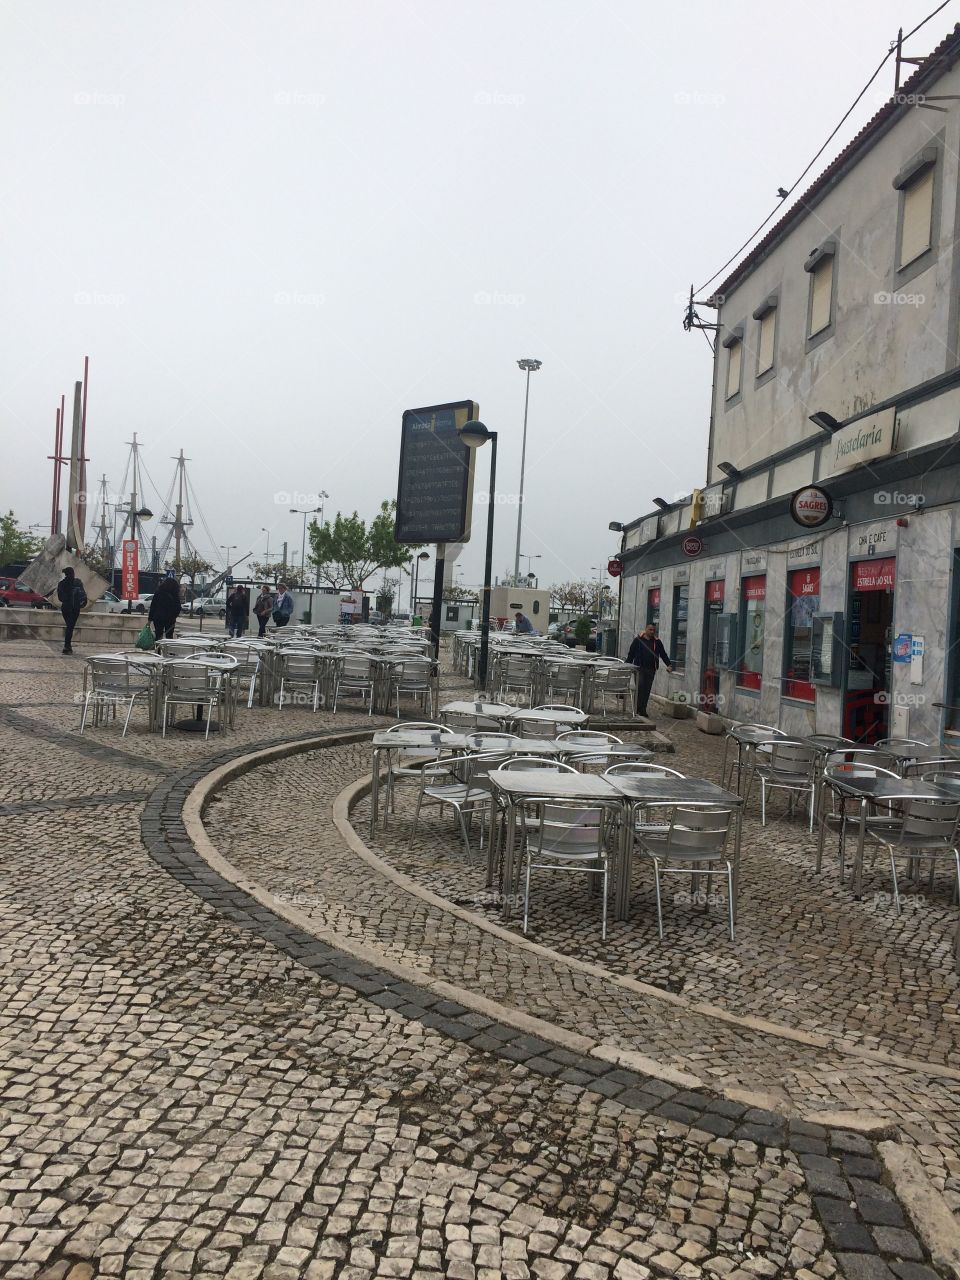 Restaurante Out side in Portugal ( cachilhas)